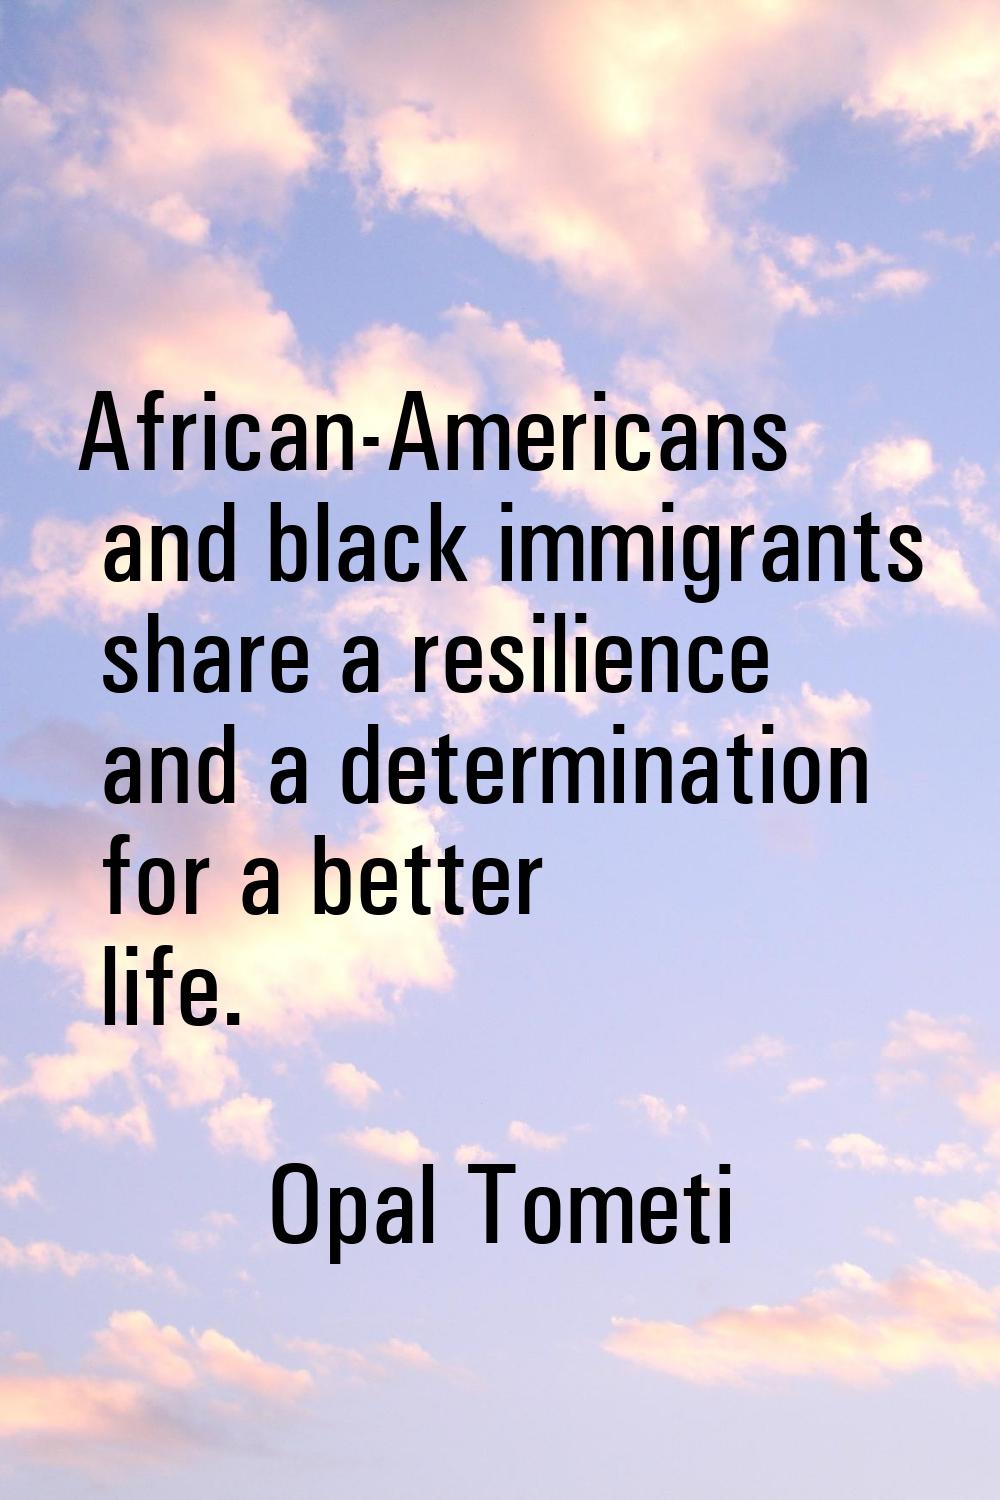 African-Americans and black immigrants share a resilience and a determination for a better life.